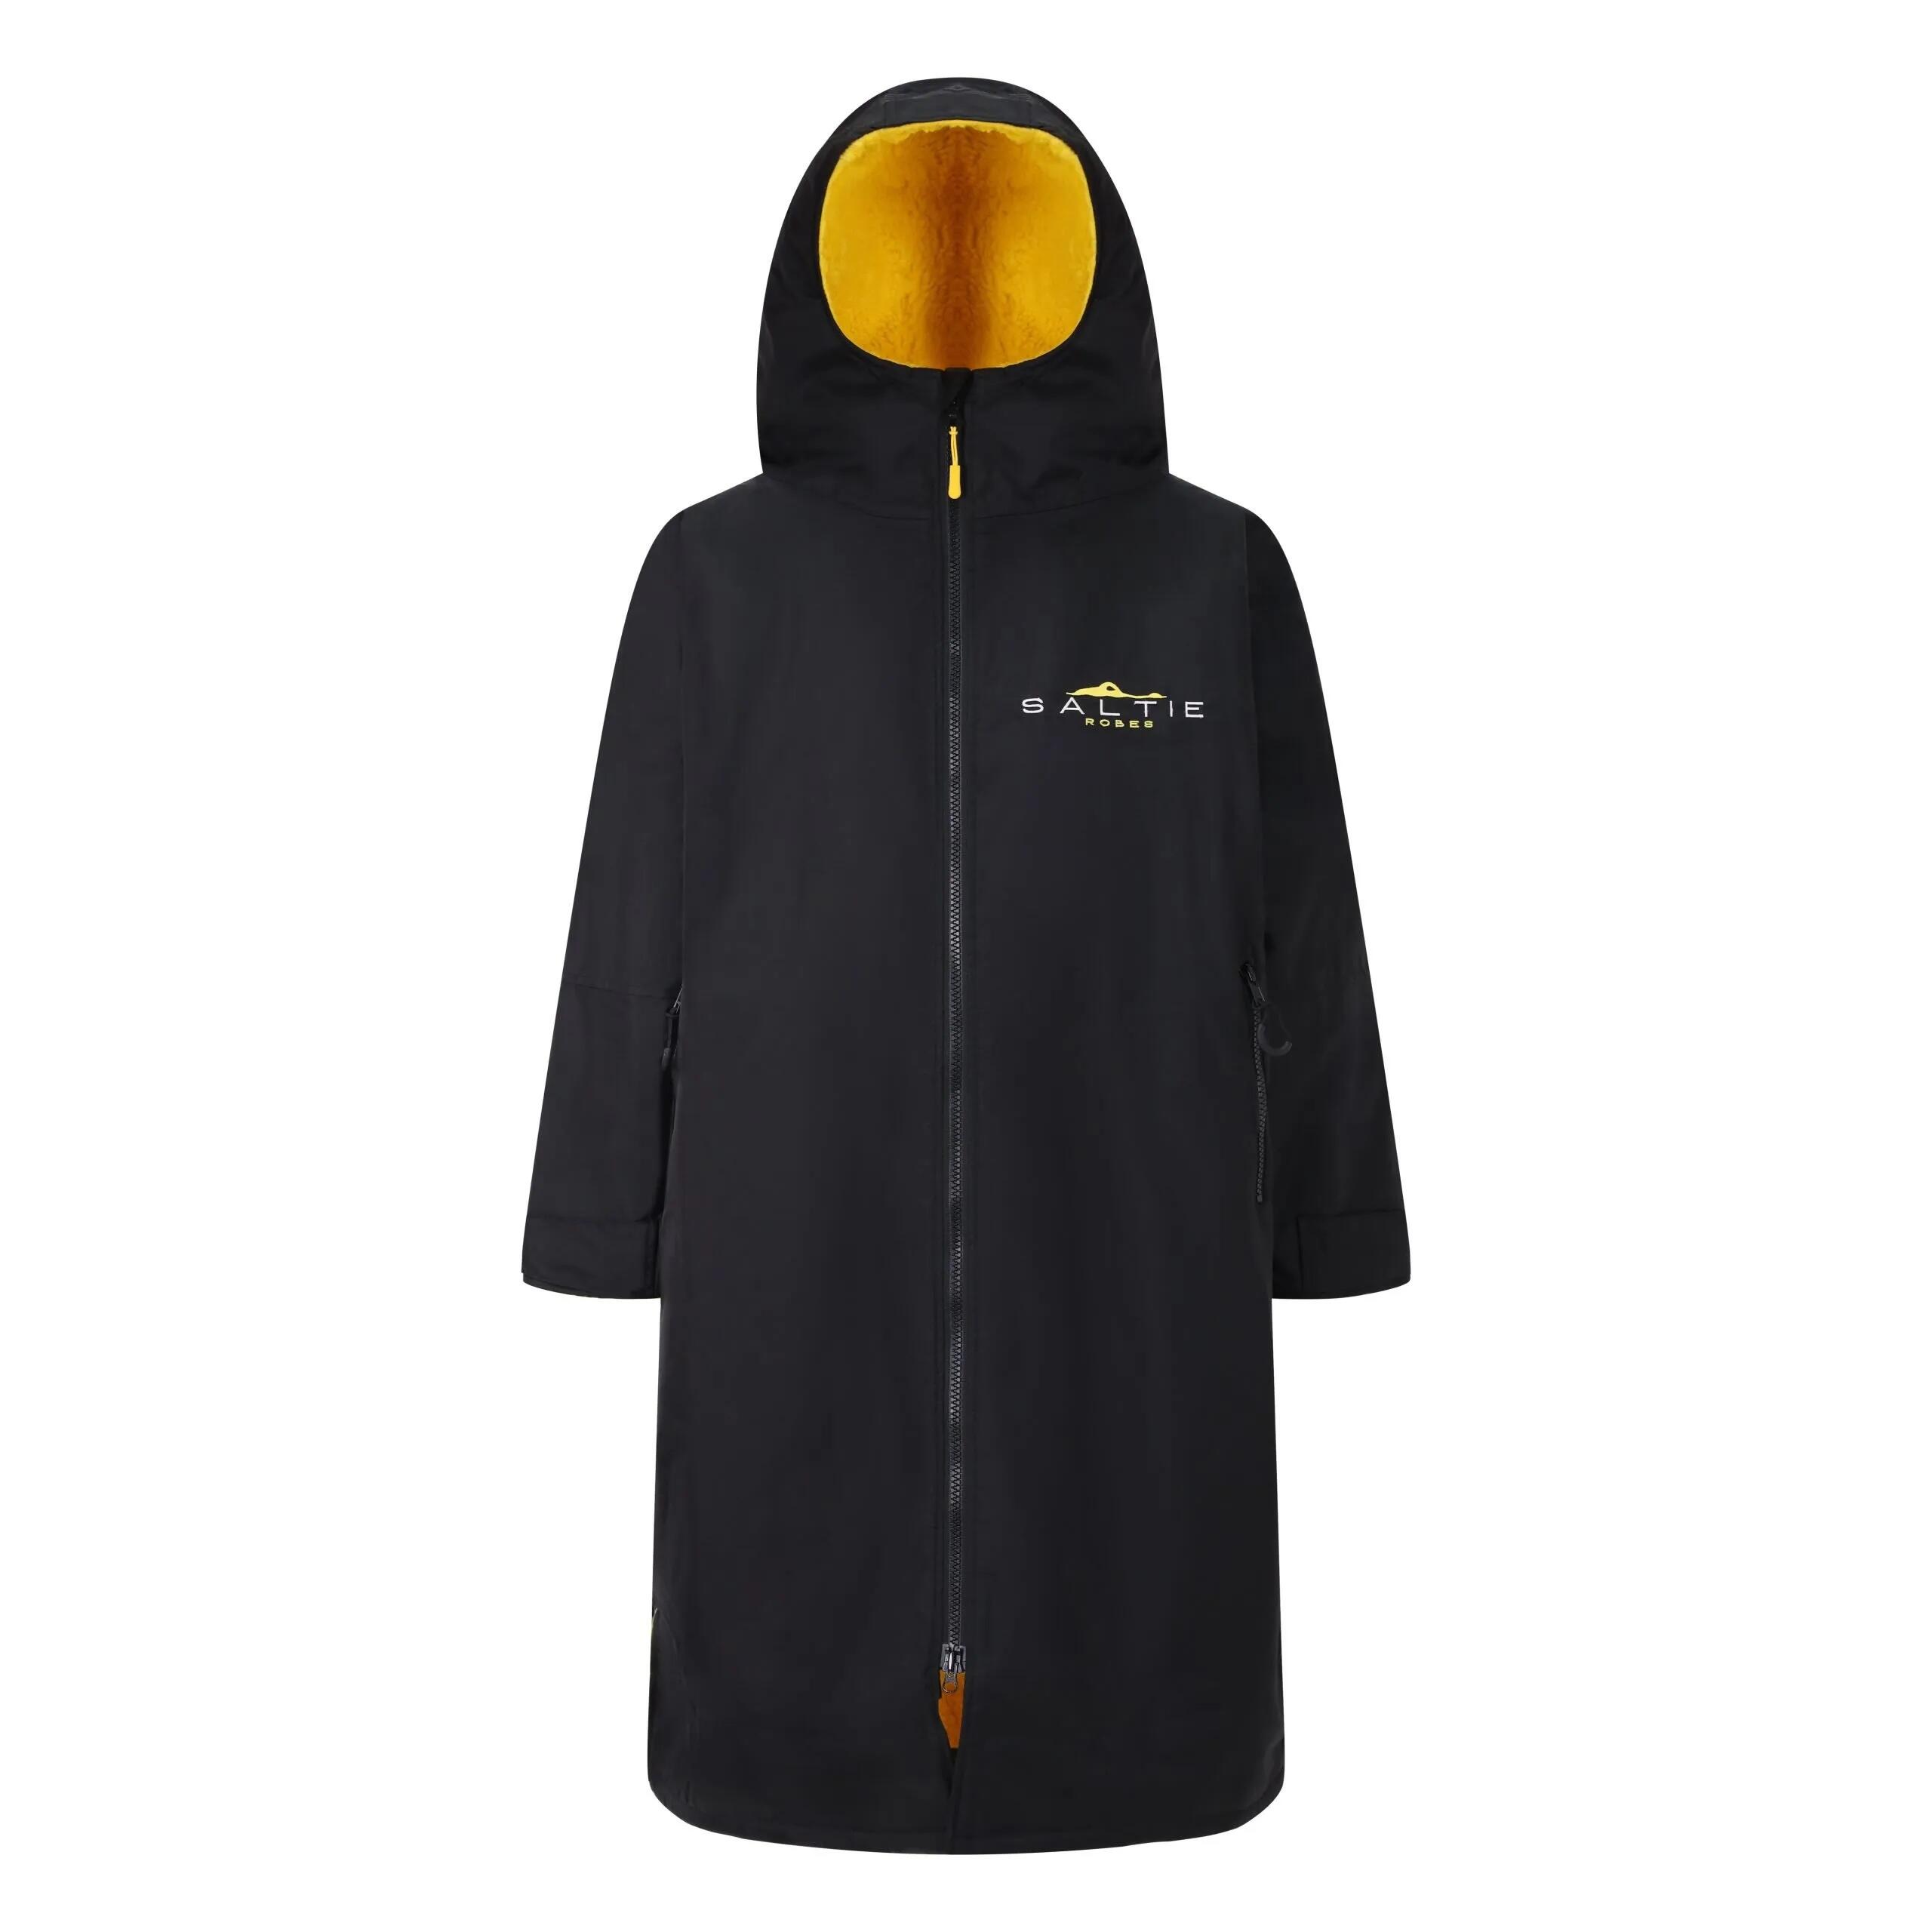 Saltie Elite Changing Robe - 100% Recycled 2/6